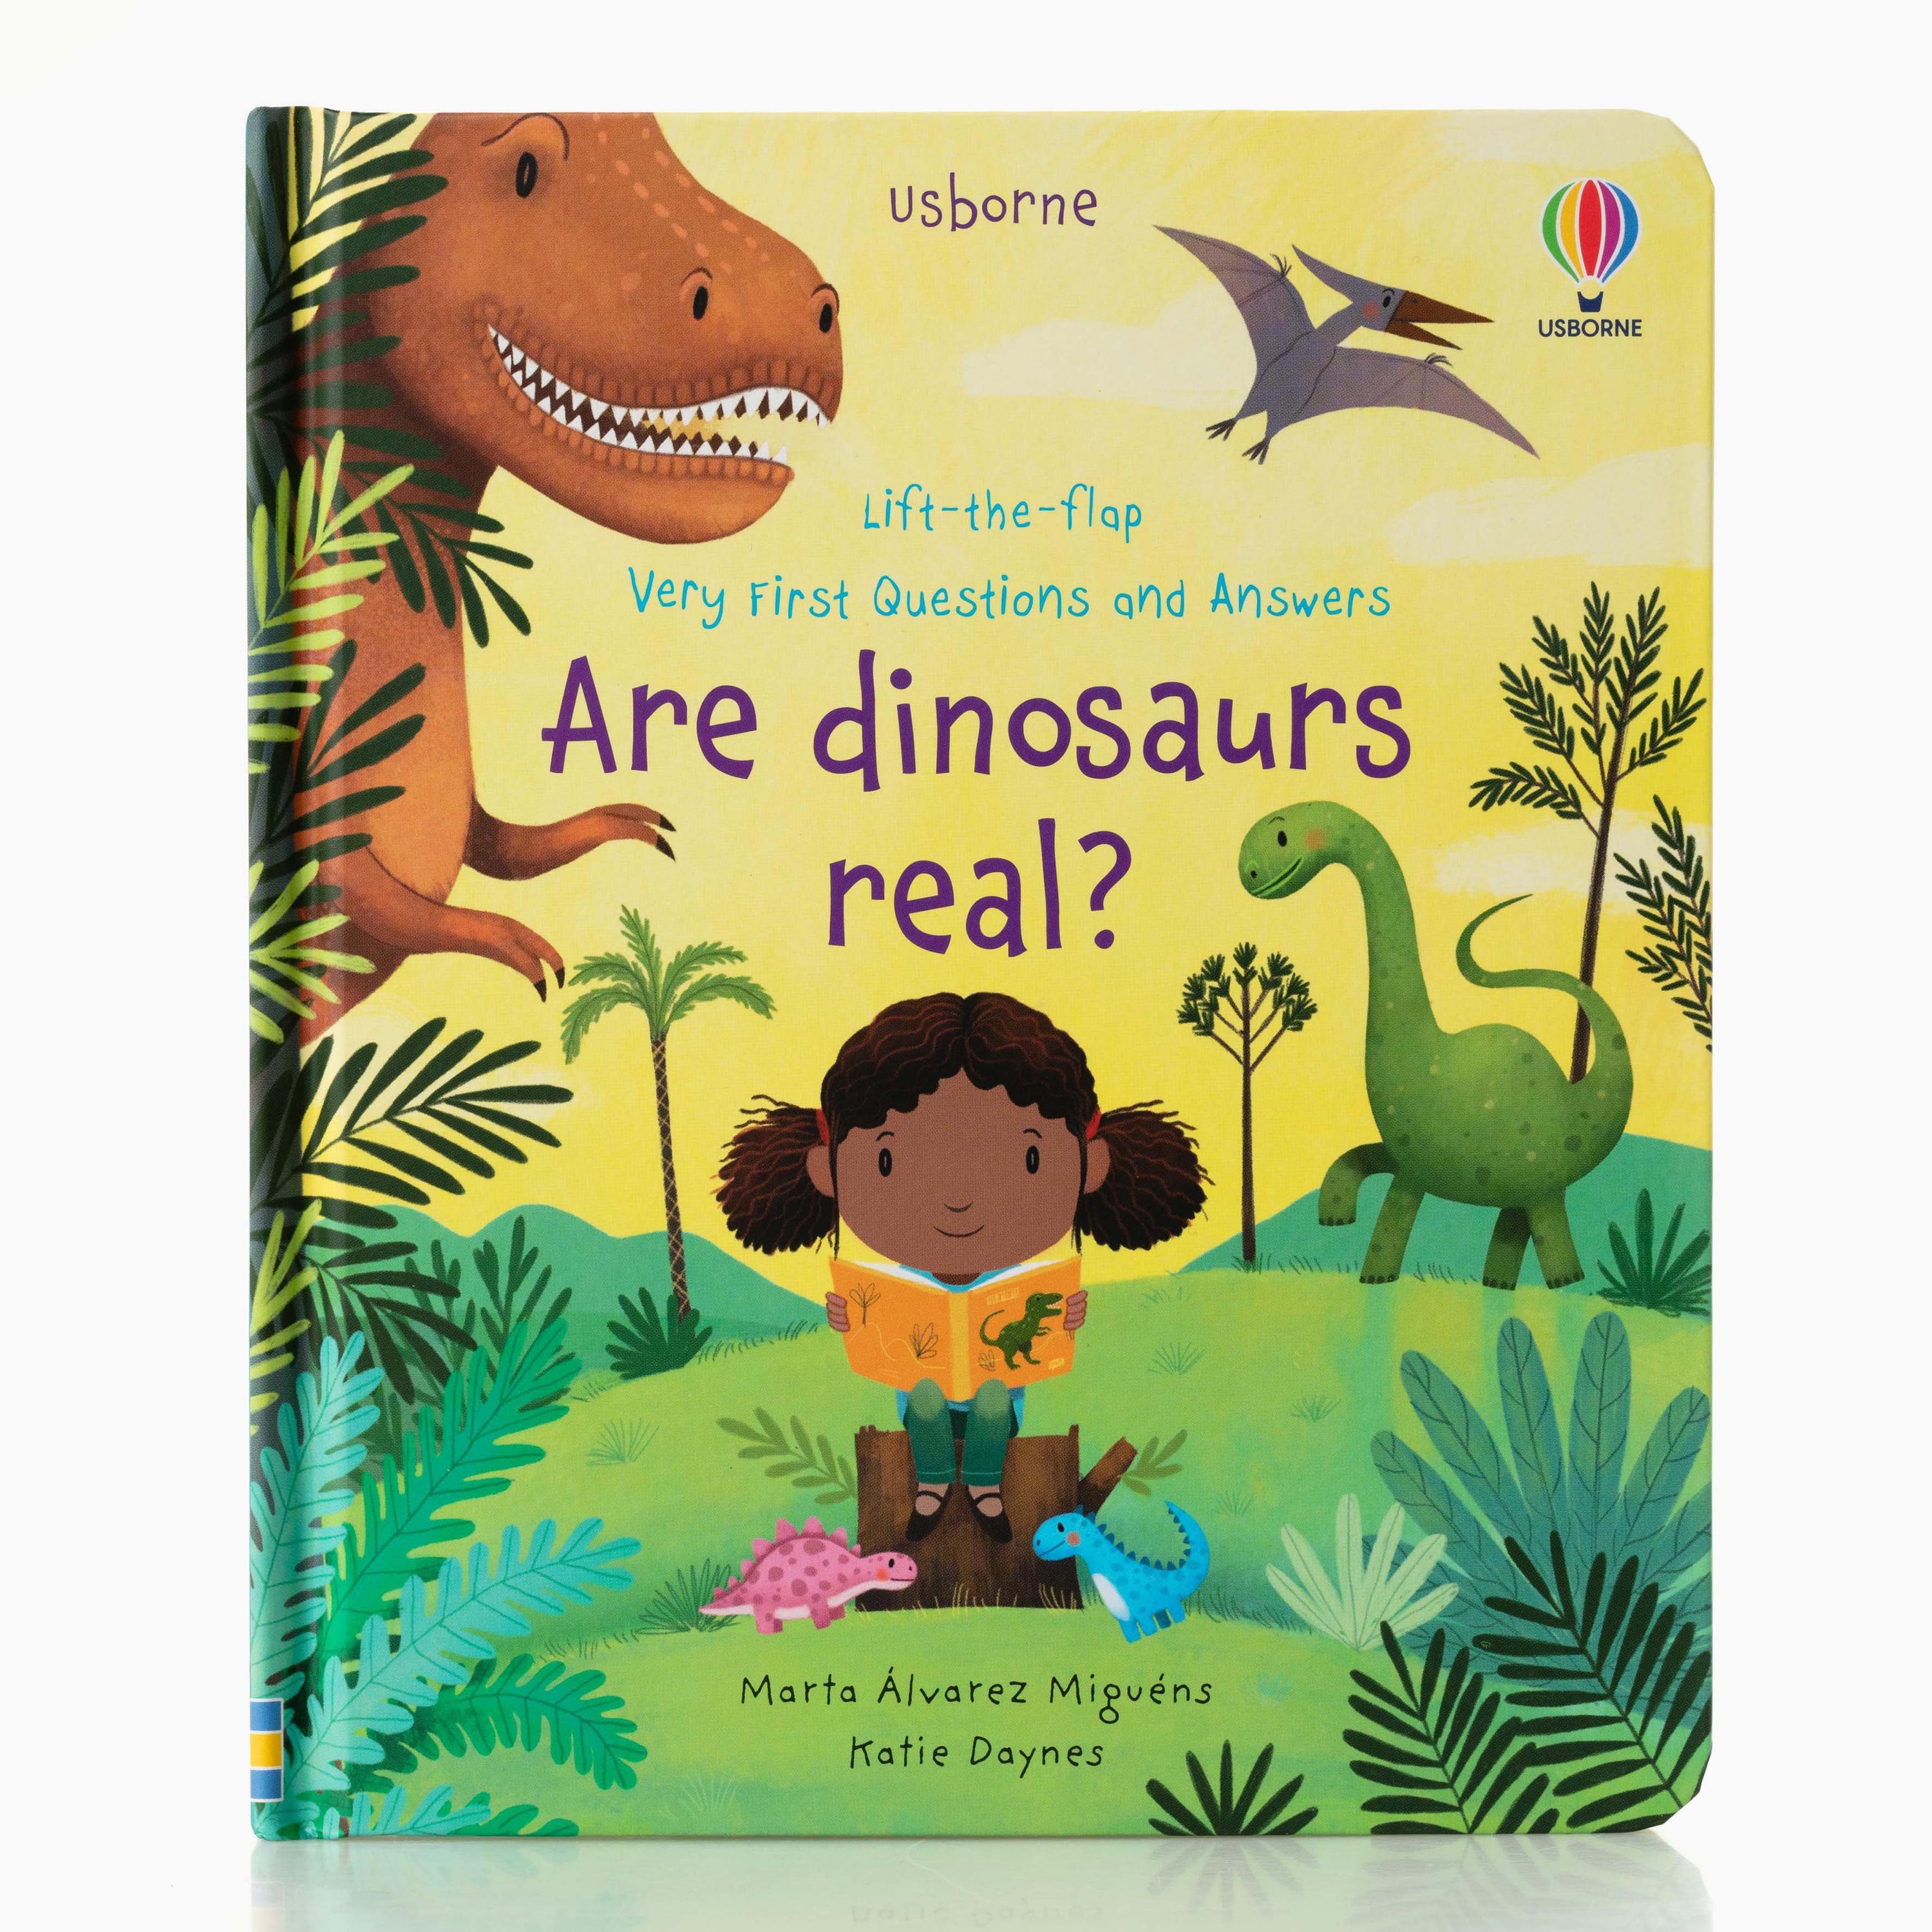 Are Dinosaurs Real?